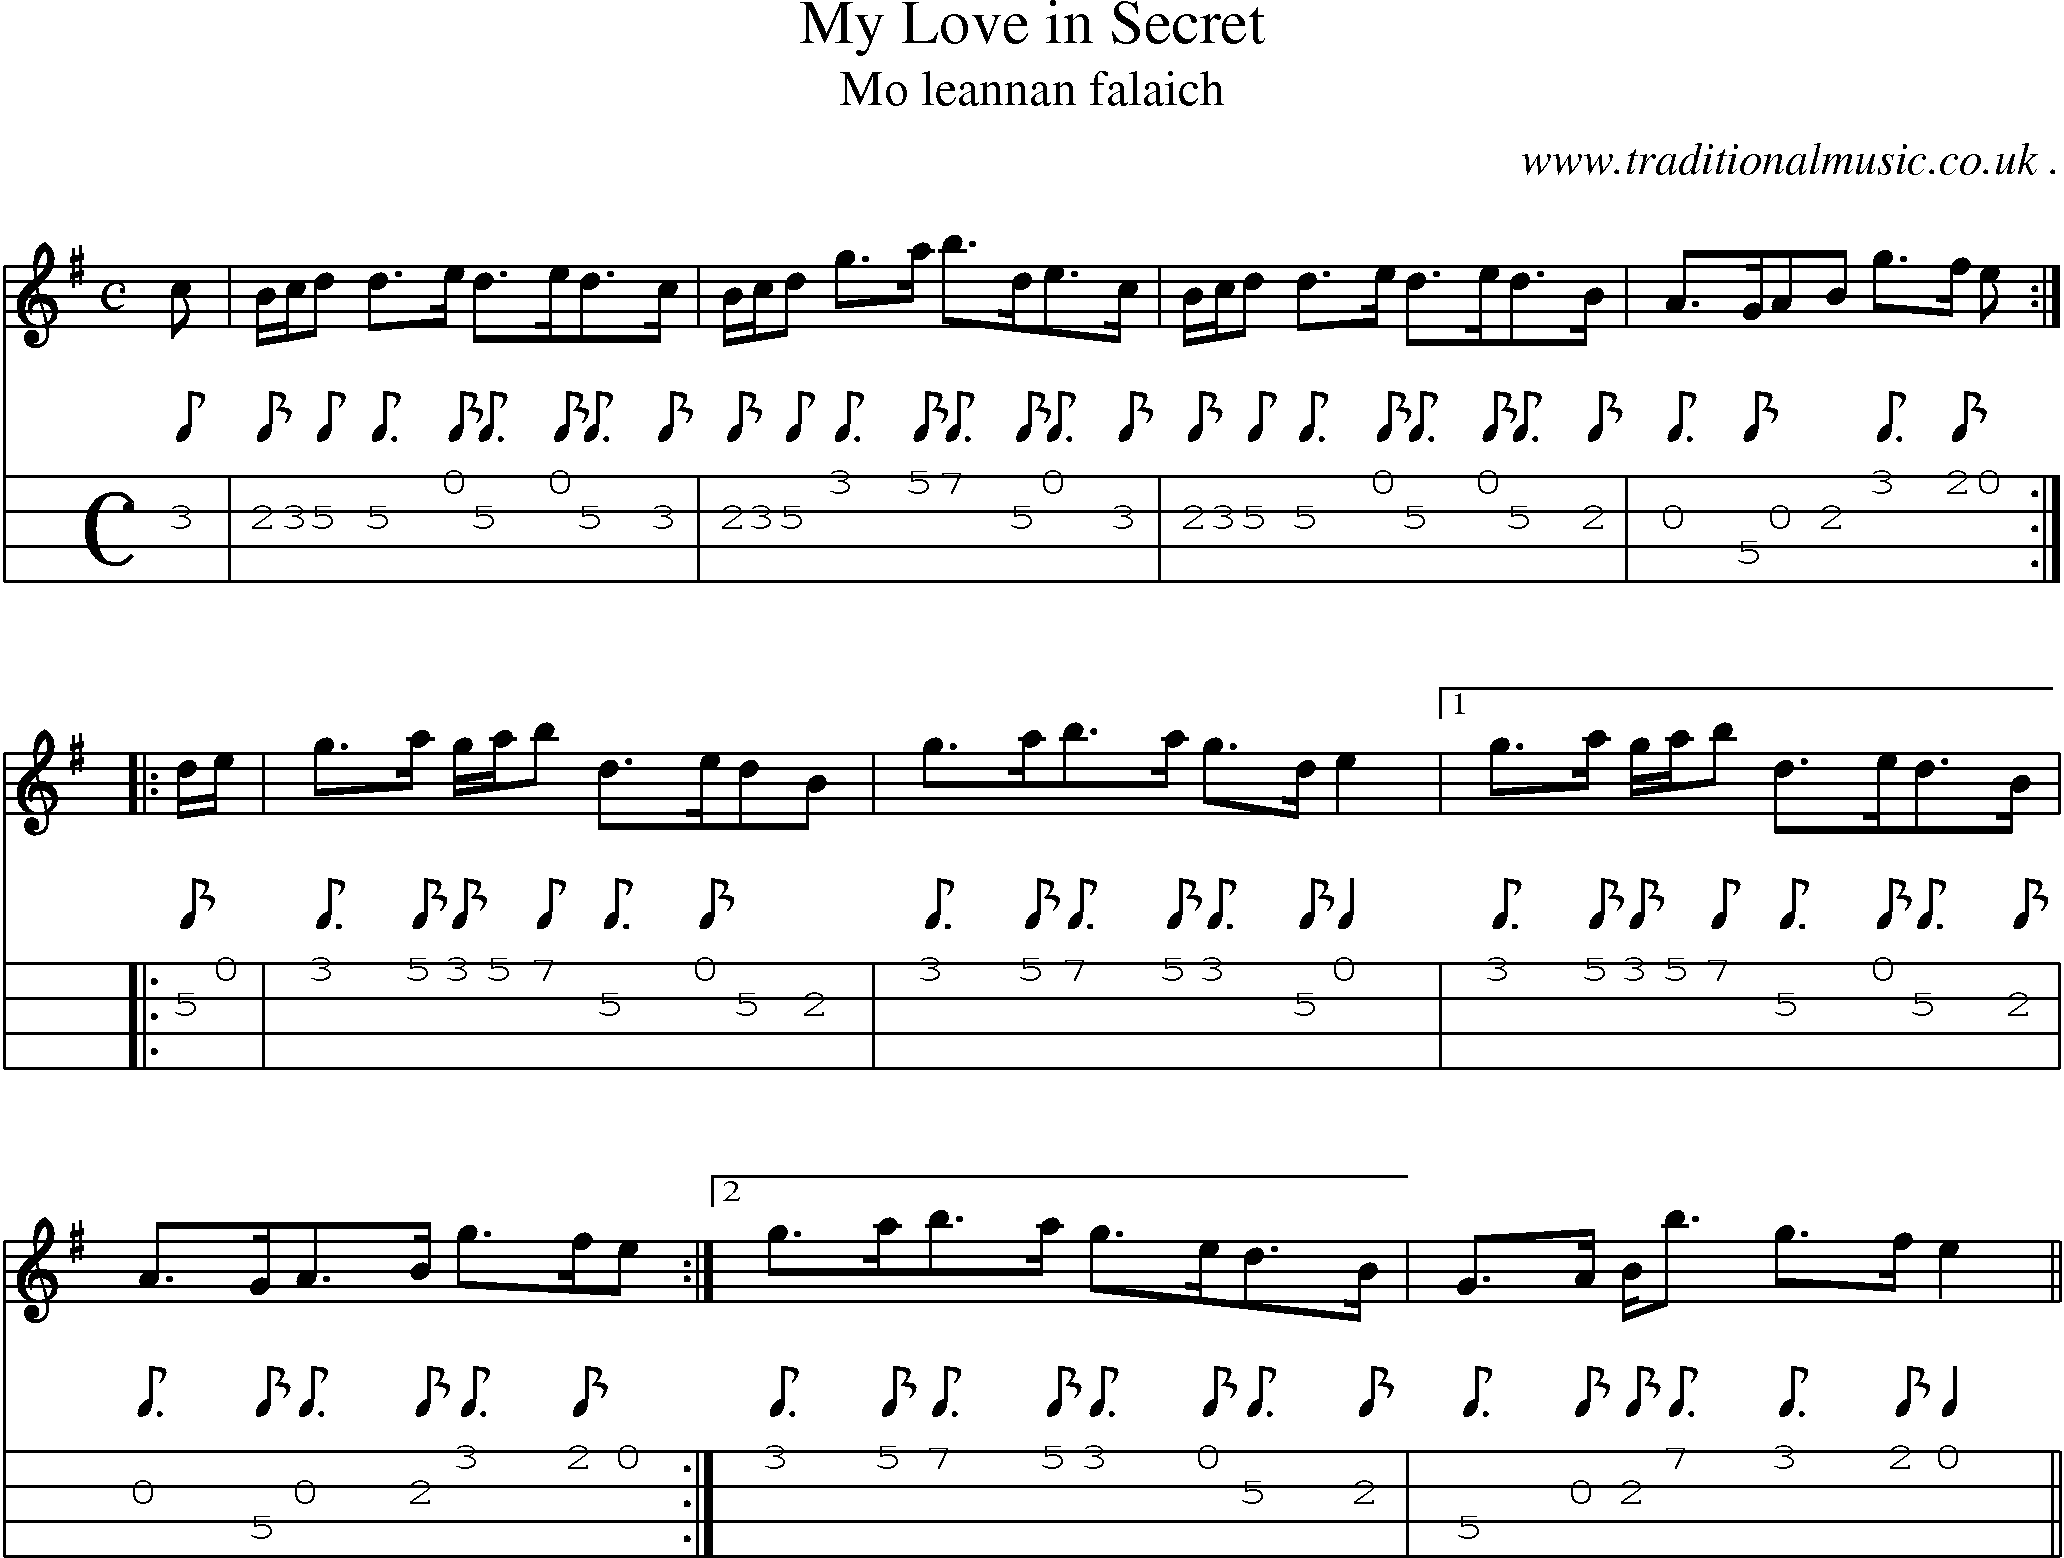 Sheet-music  score, Chords and Mandolin Tabs for My Love In Secret